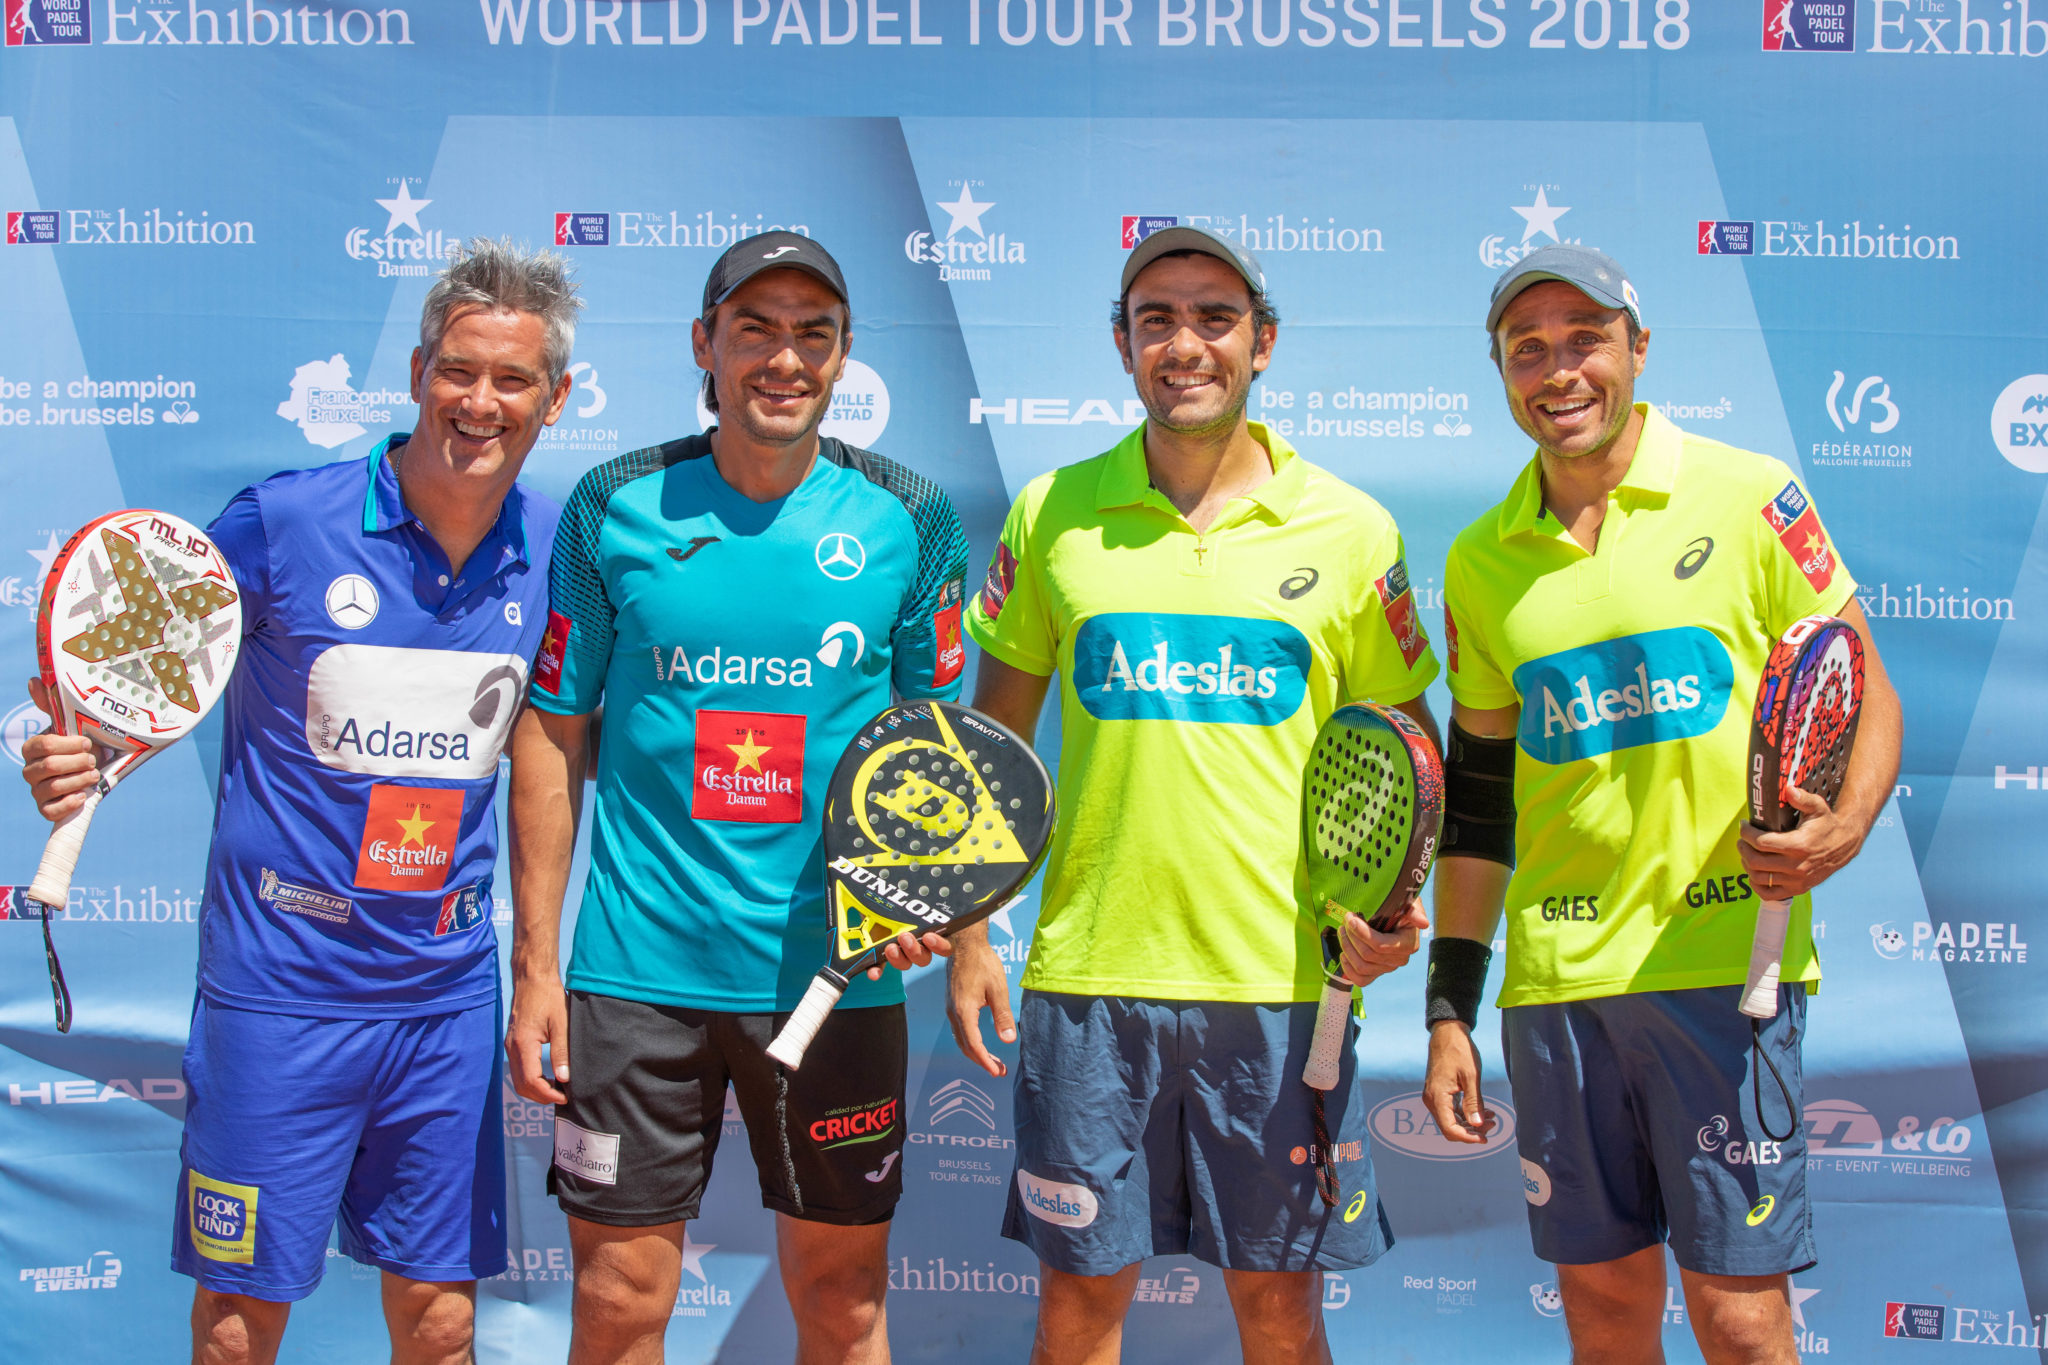 Le World Padel Tour Brussels is already working on the 3rd edition